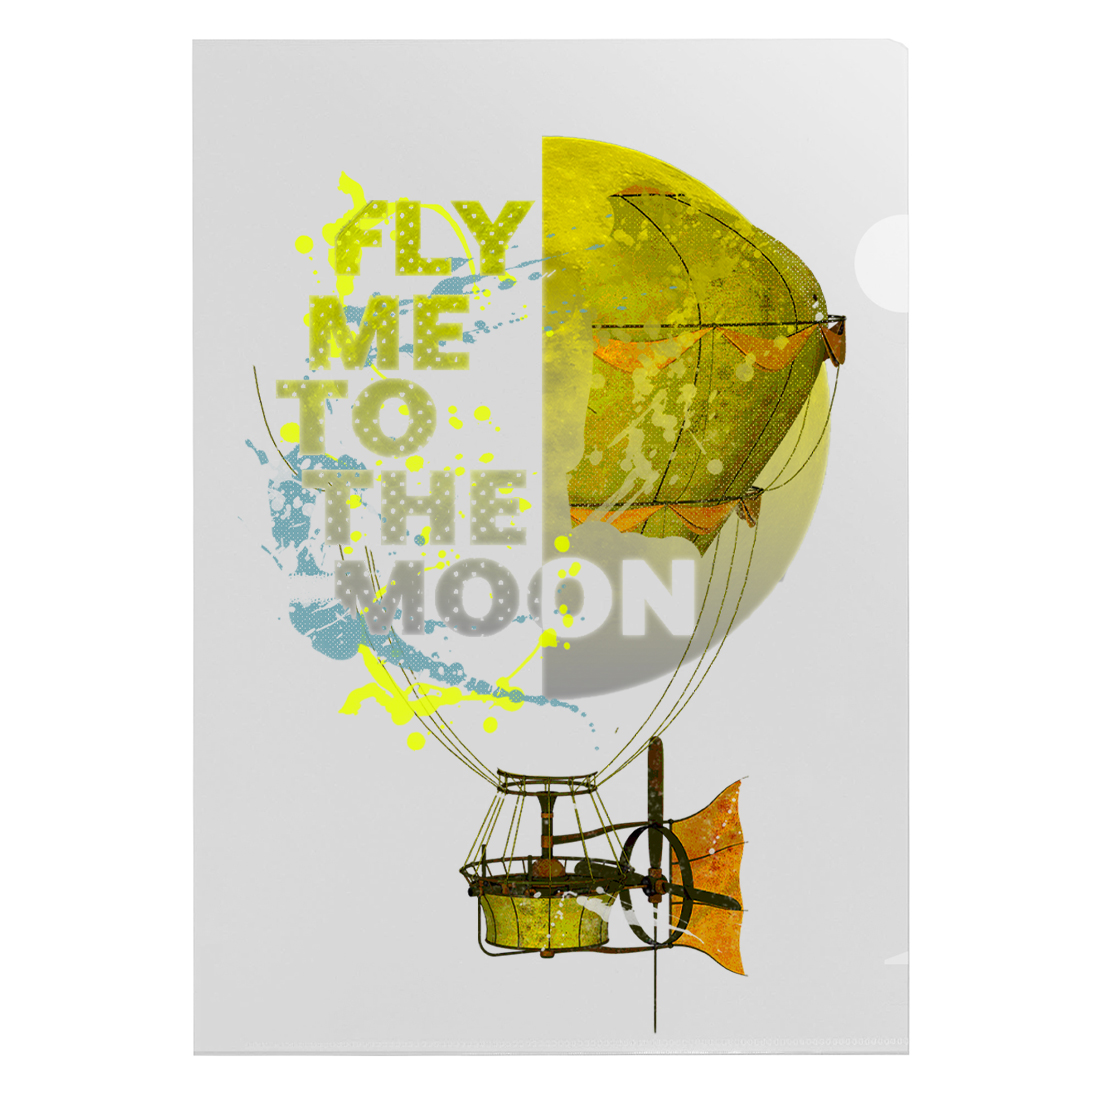 190607 – FLY ME TO THE MOON